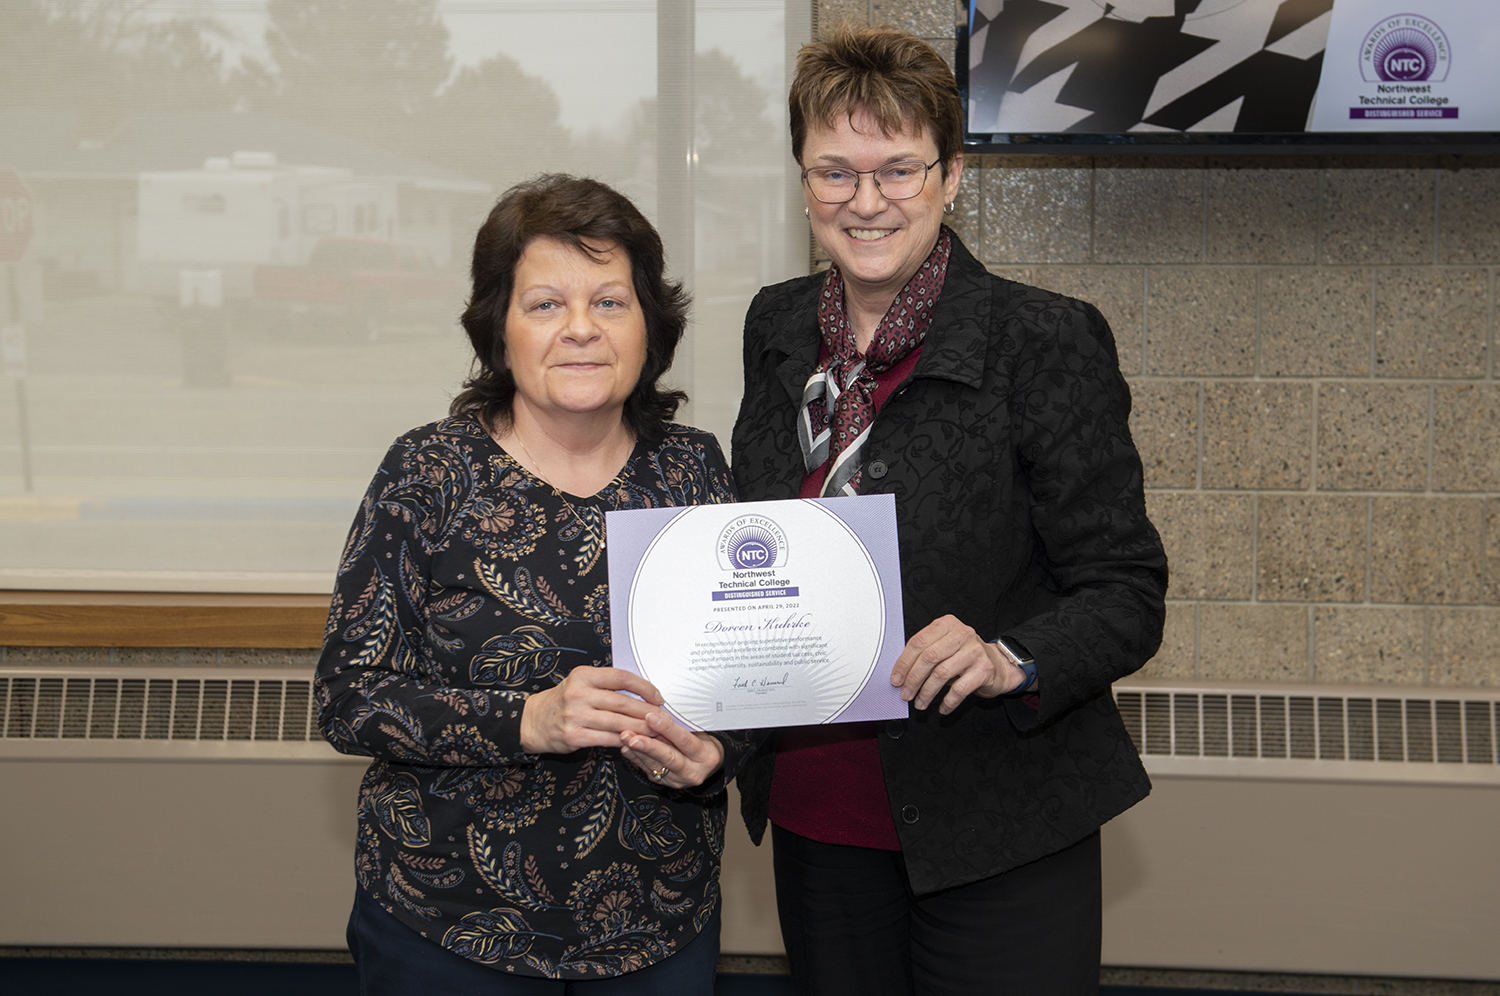 President Faith Hensrud presenting Doreen Kuhrke, administrative assistant, the NTC Distinguished Service Award.